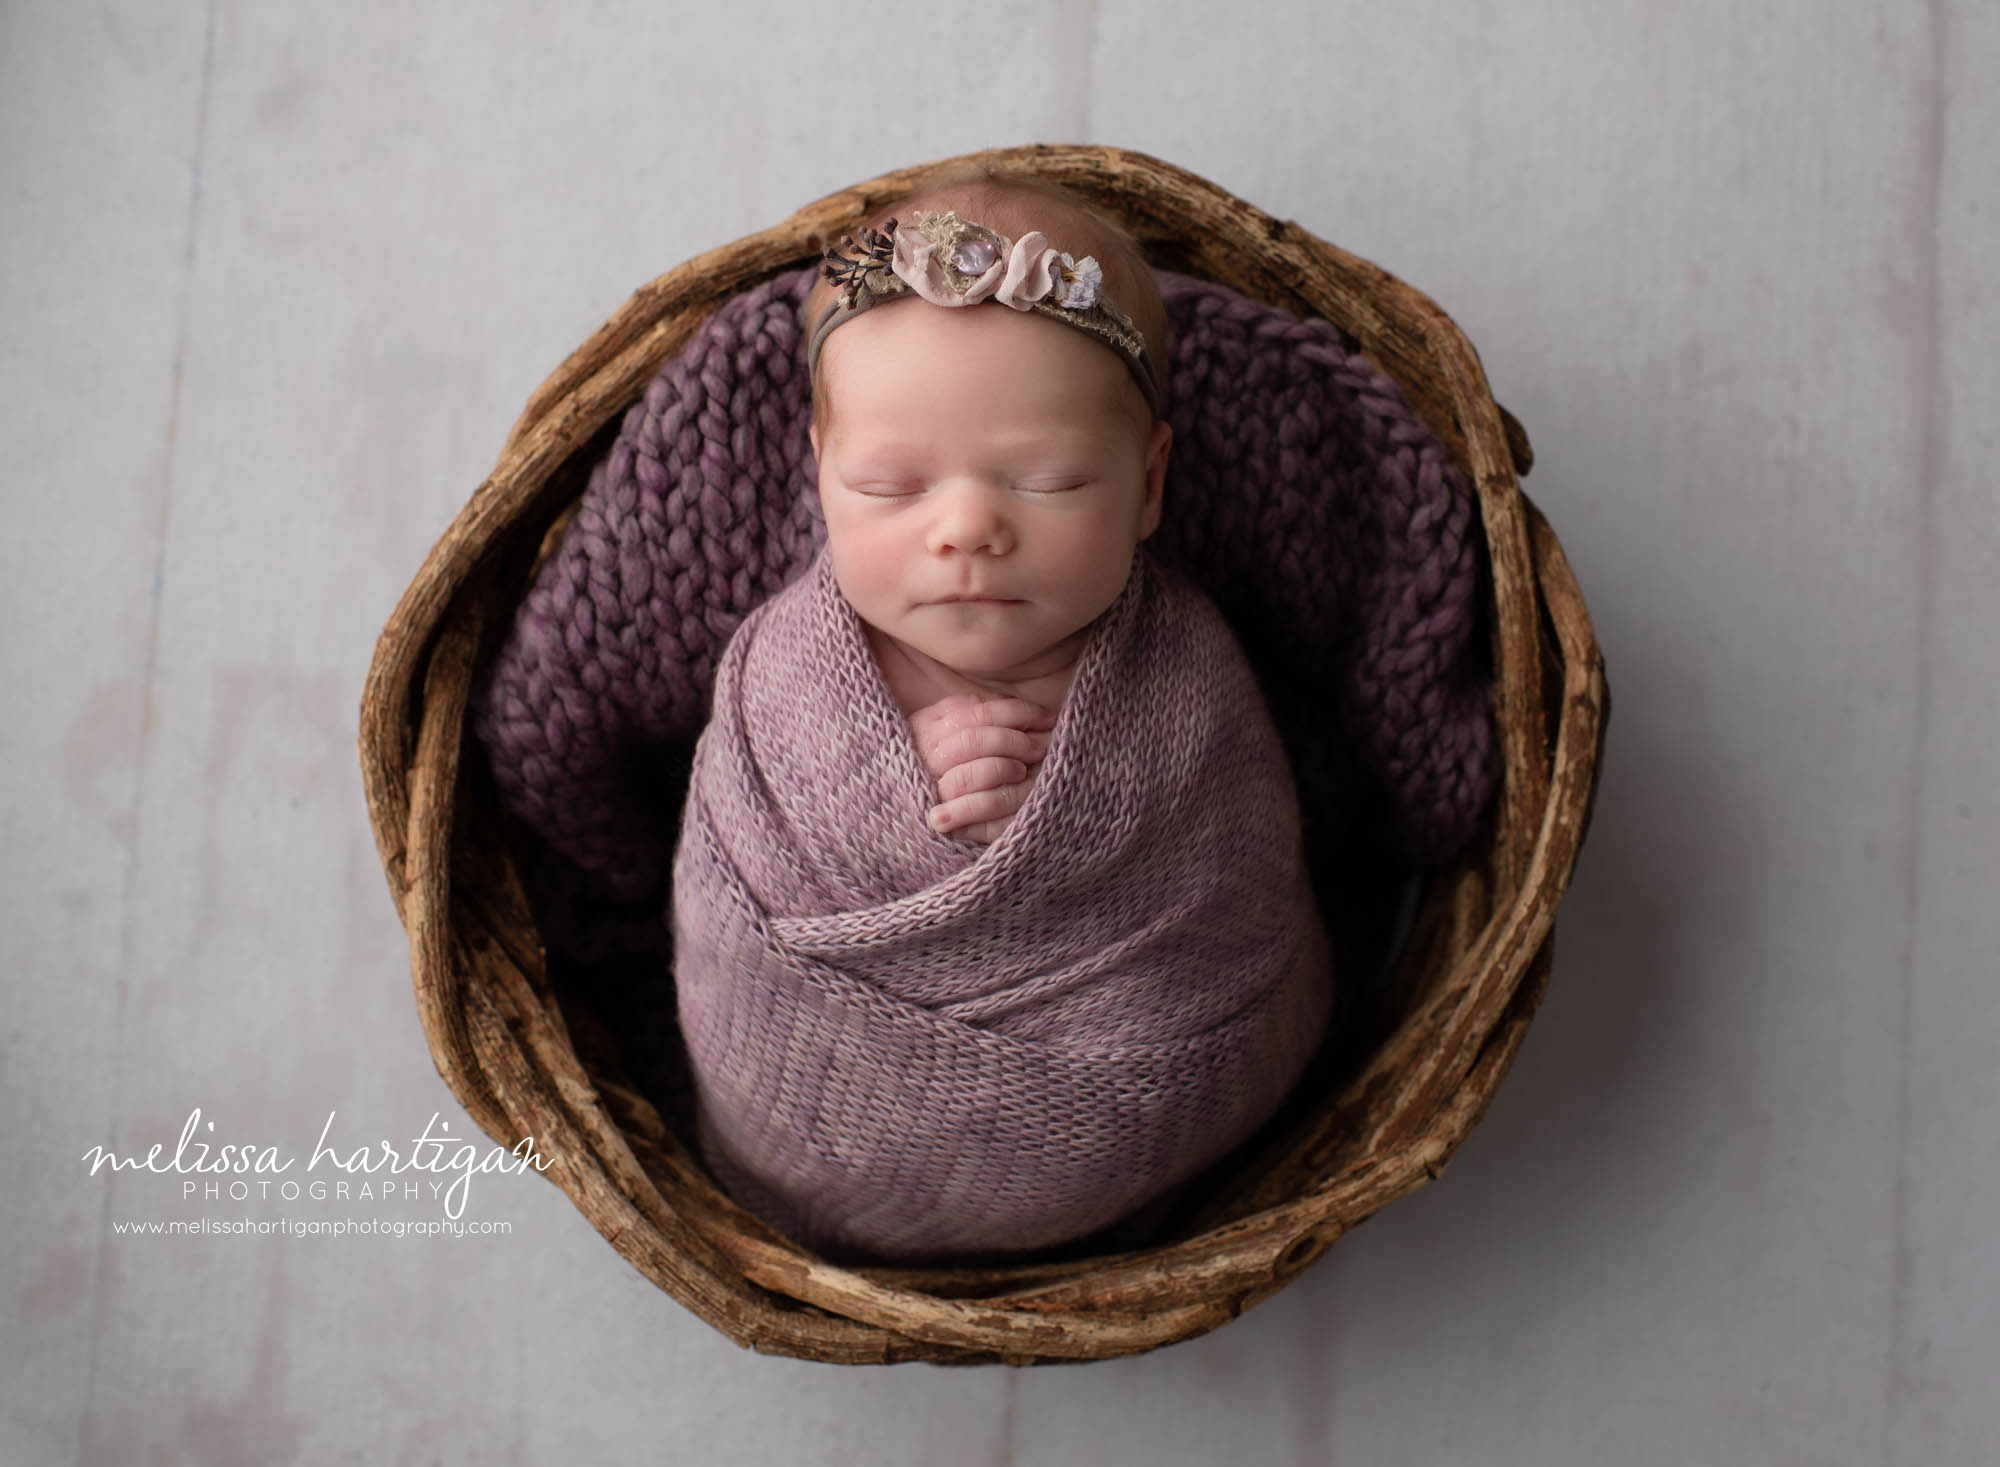 newbonr baby girl wrapped in purple wrap with flower headband purple layer and wicker basket